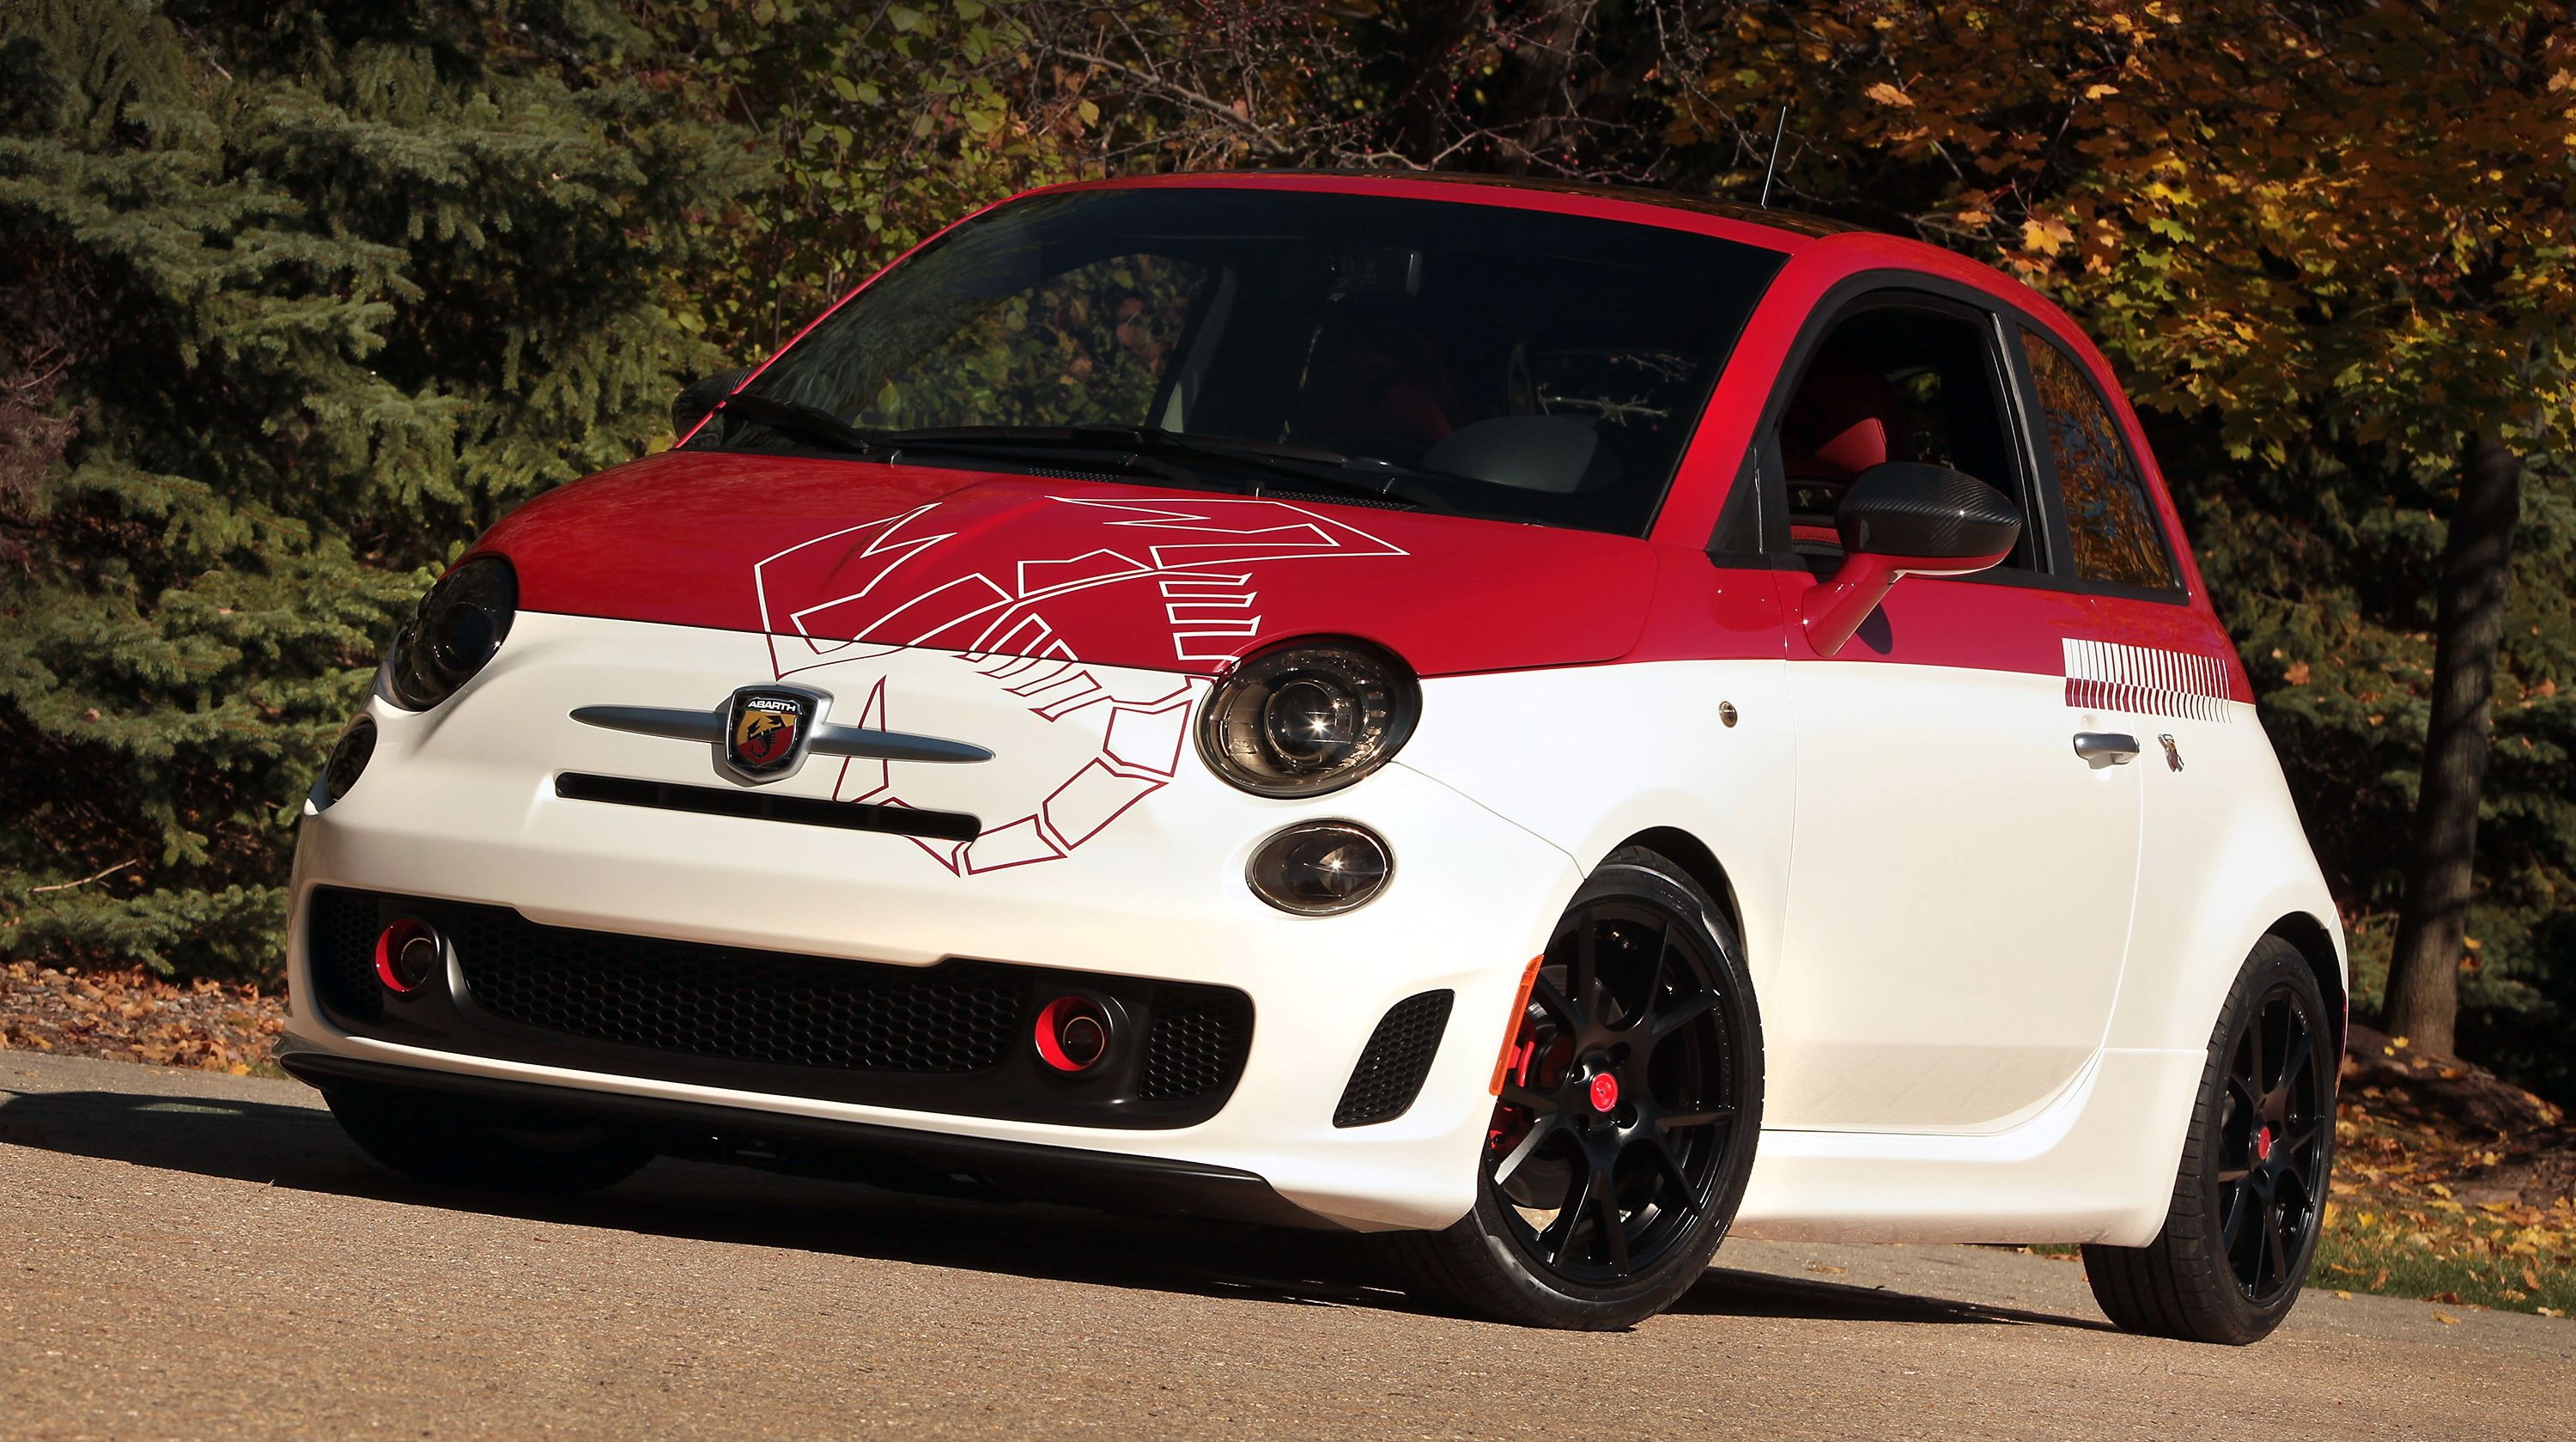  Fiat's hitting SEMA with a modified 500 Abarth, but it looks to carry the same 160-horse engine. 